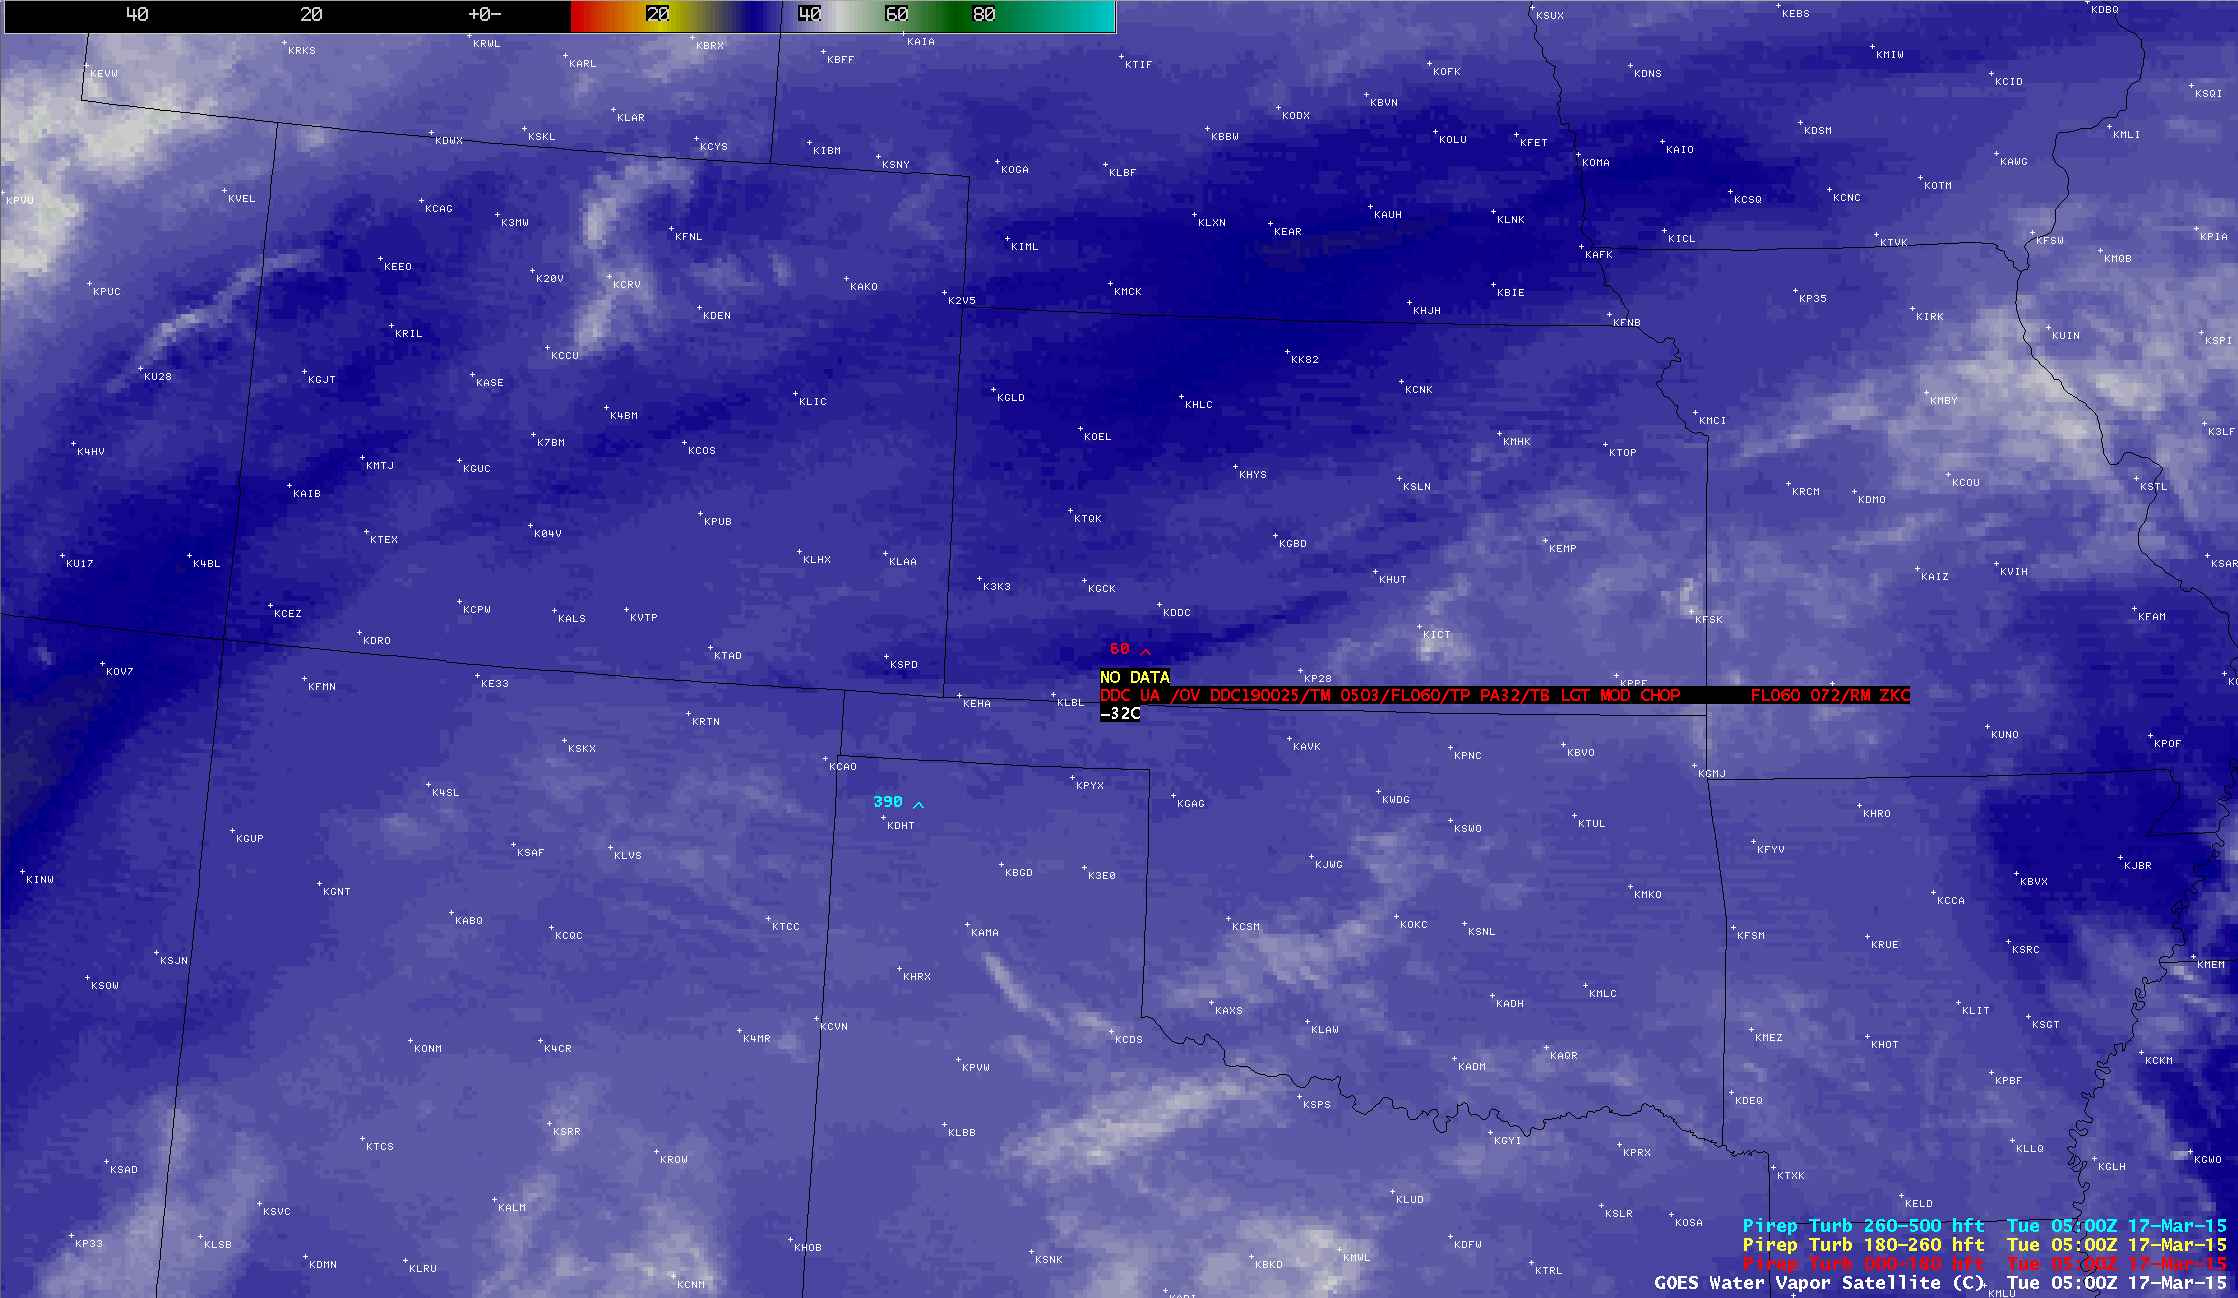 GOES-13 6.5 µm water vapor channel image with pilot report of turbulence